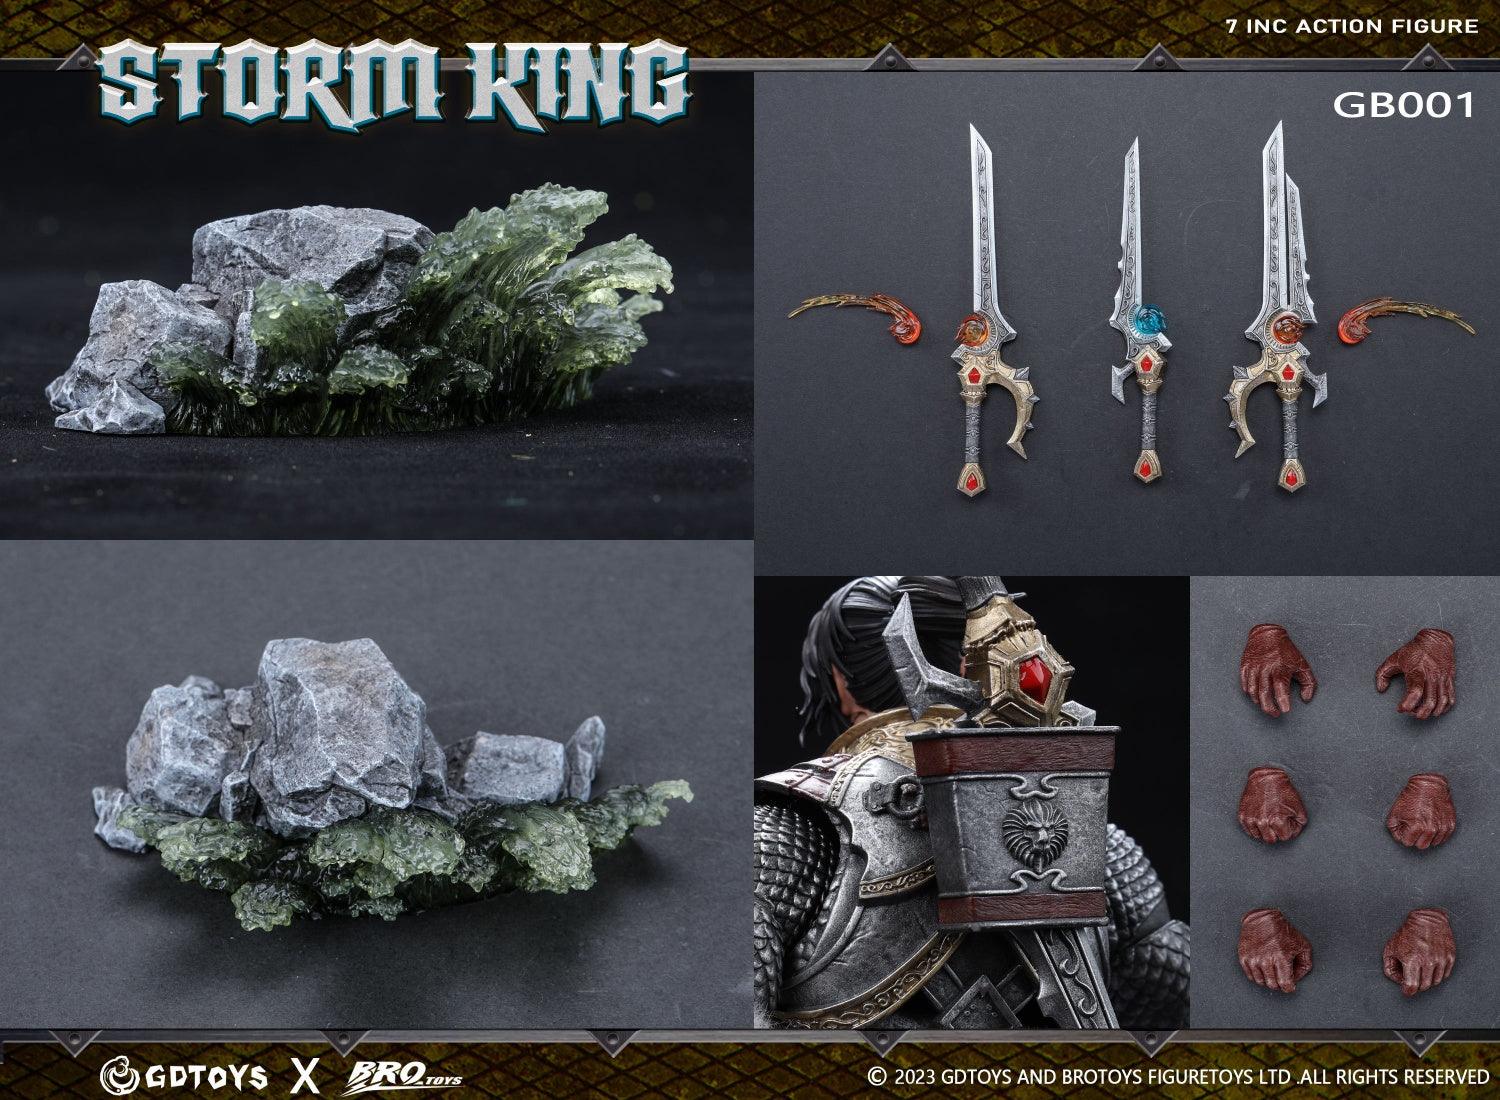 GD Toys - 1:10 Storm King Action Figure